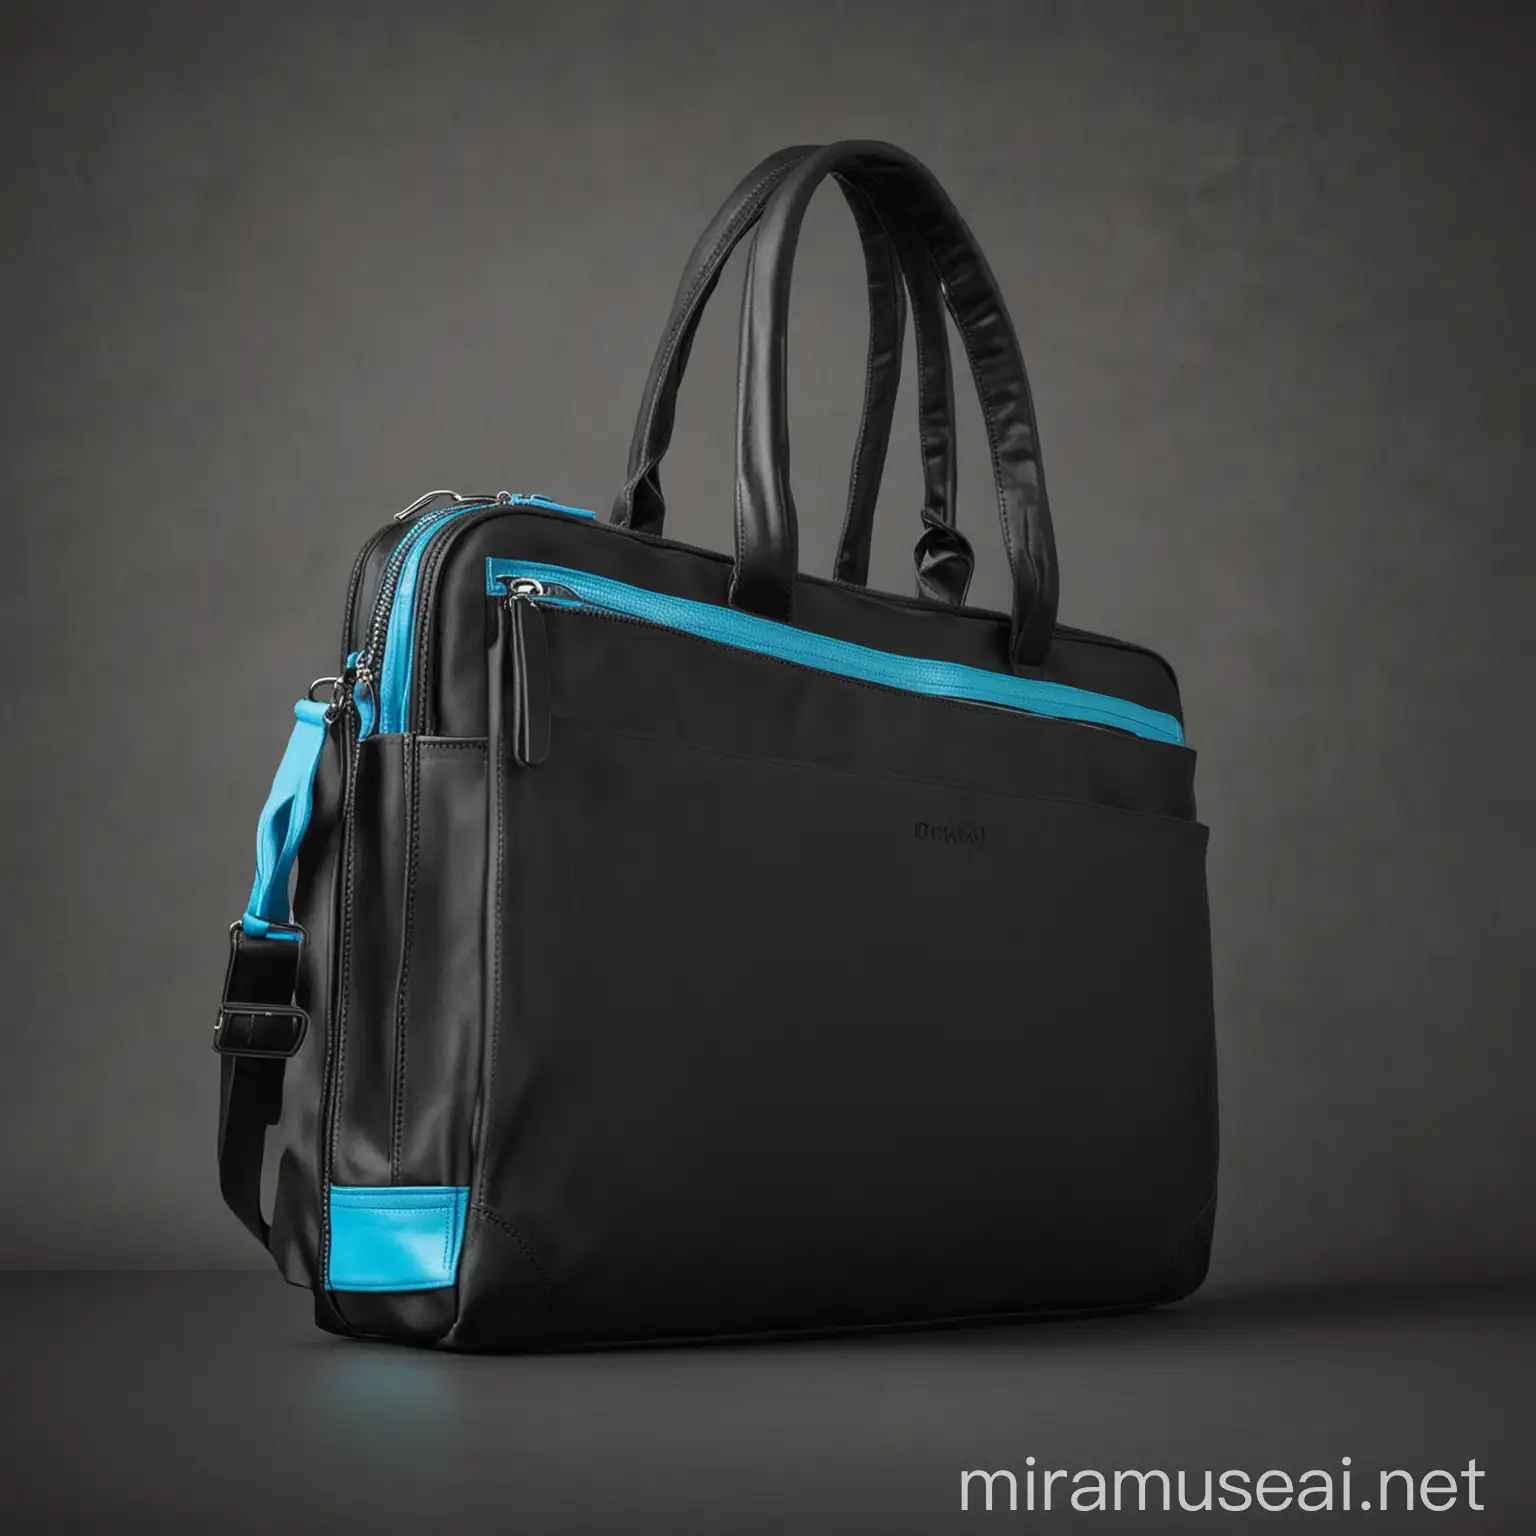 Create a sleek black laptop bag with the color cerulean accent colors. Place the bag in a quiet office setting 

